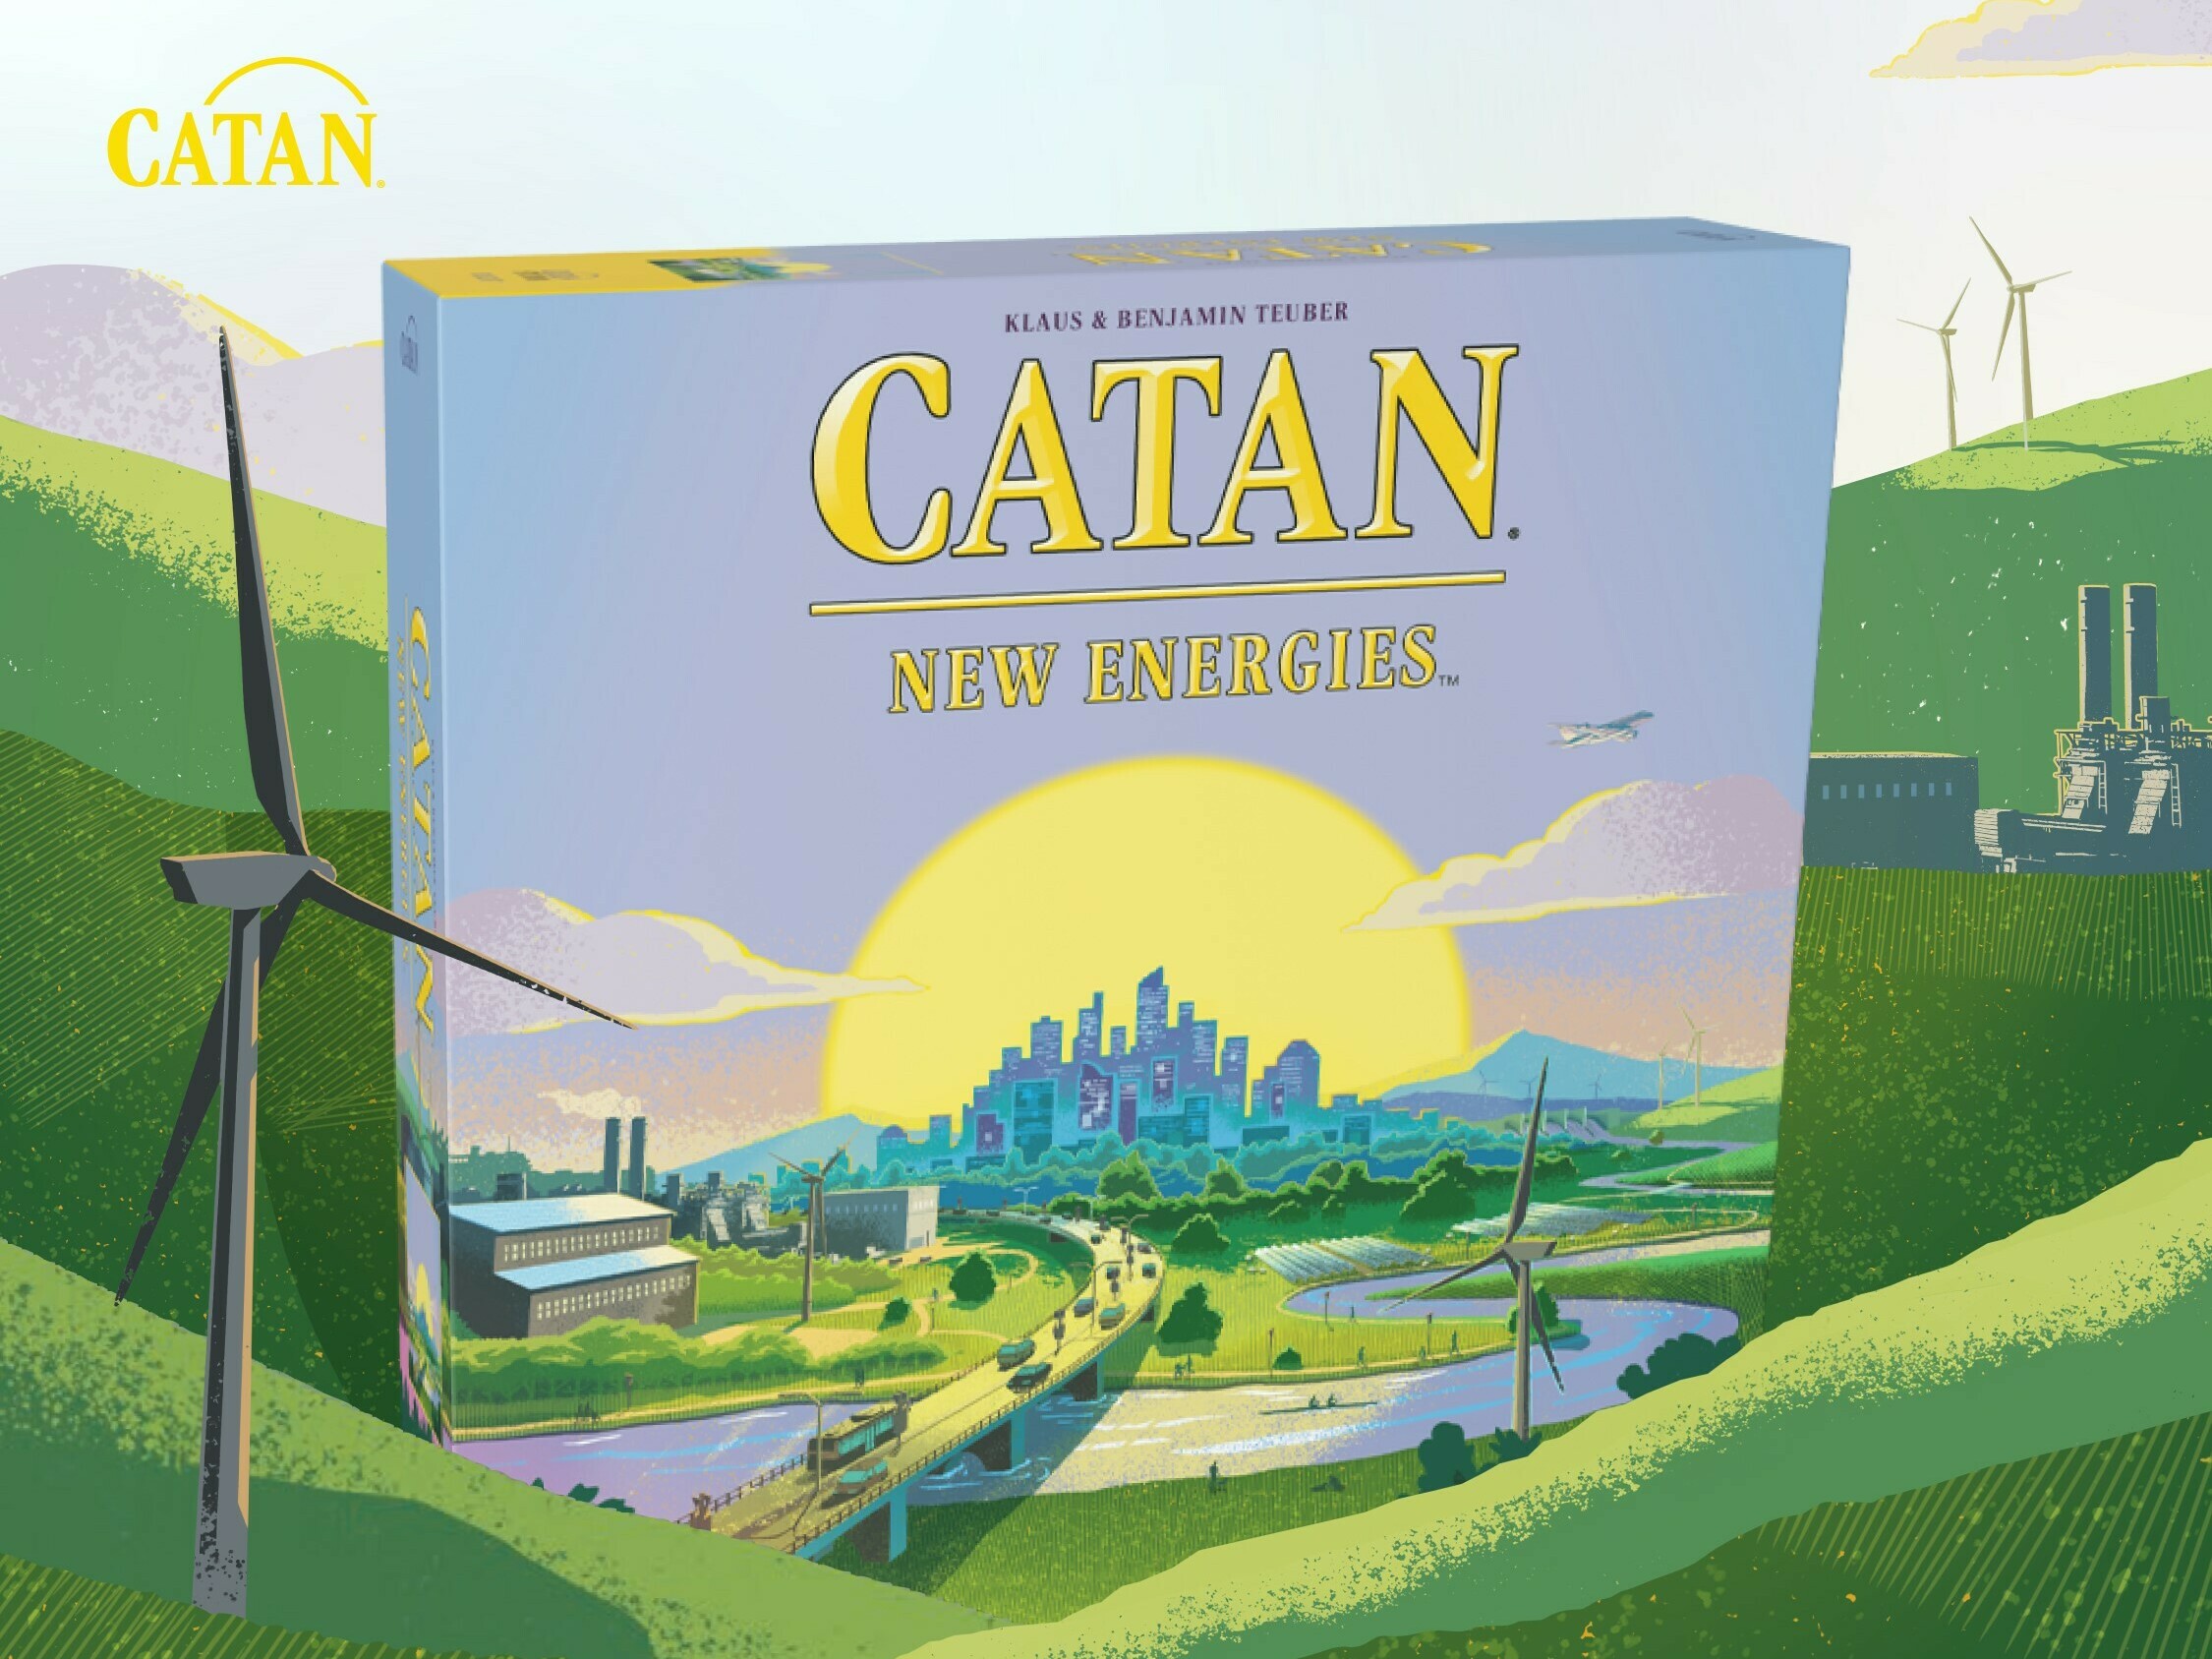 How do you build without over polluting? That’s the challenge of new Catan board game